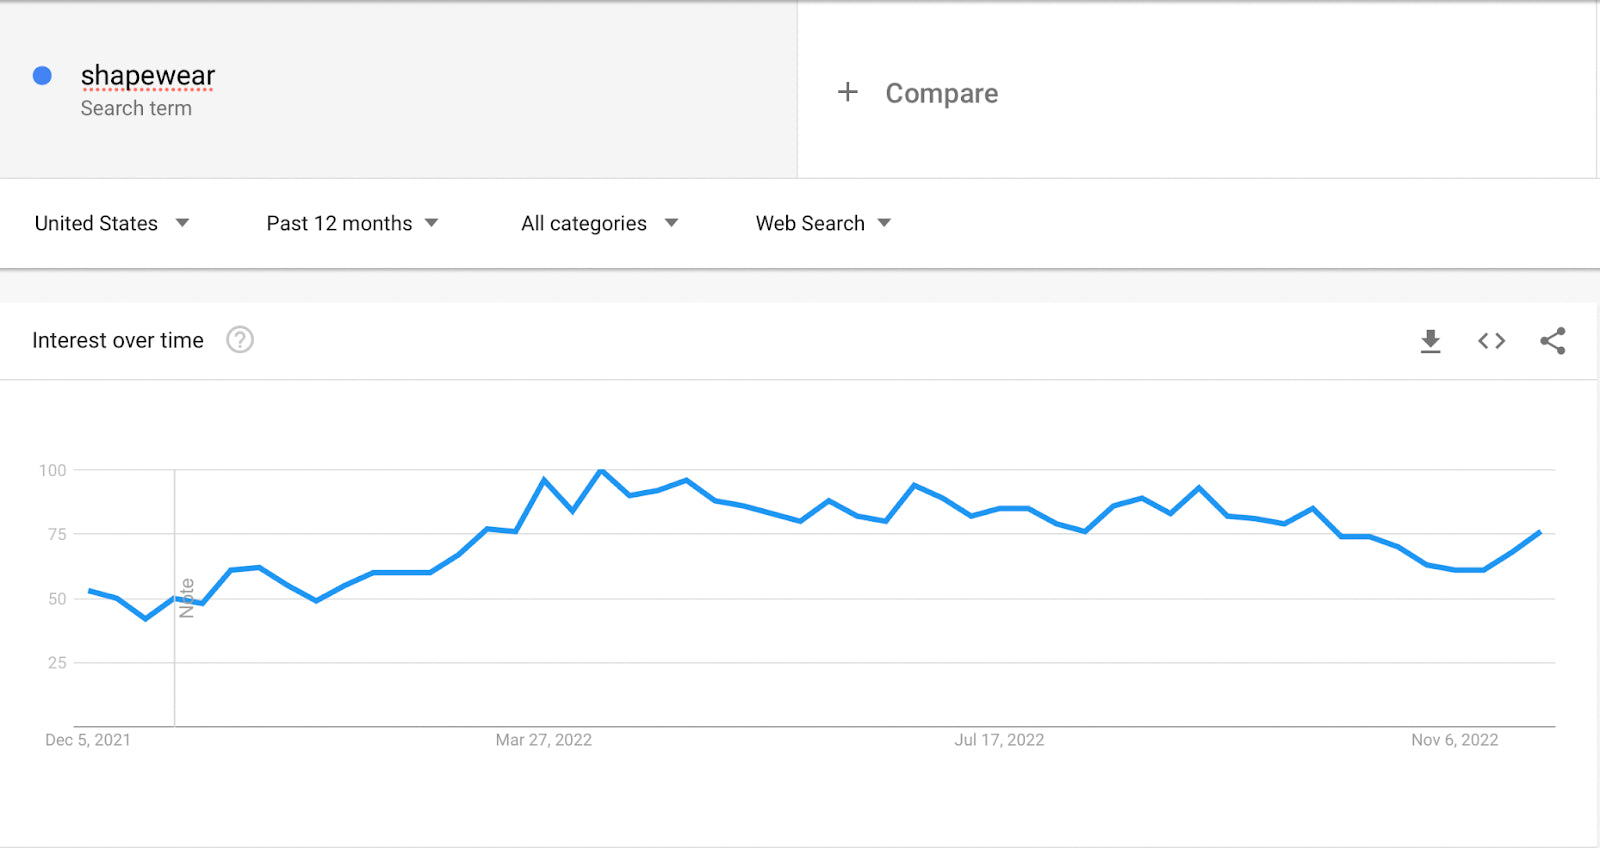 High search volume of shapewear throughout the year